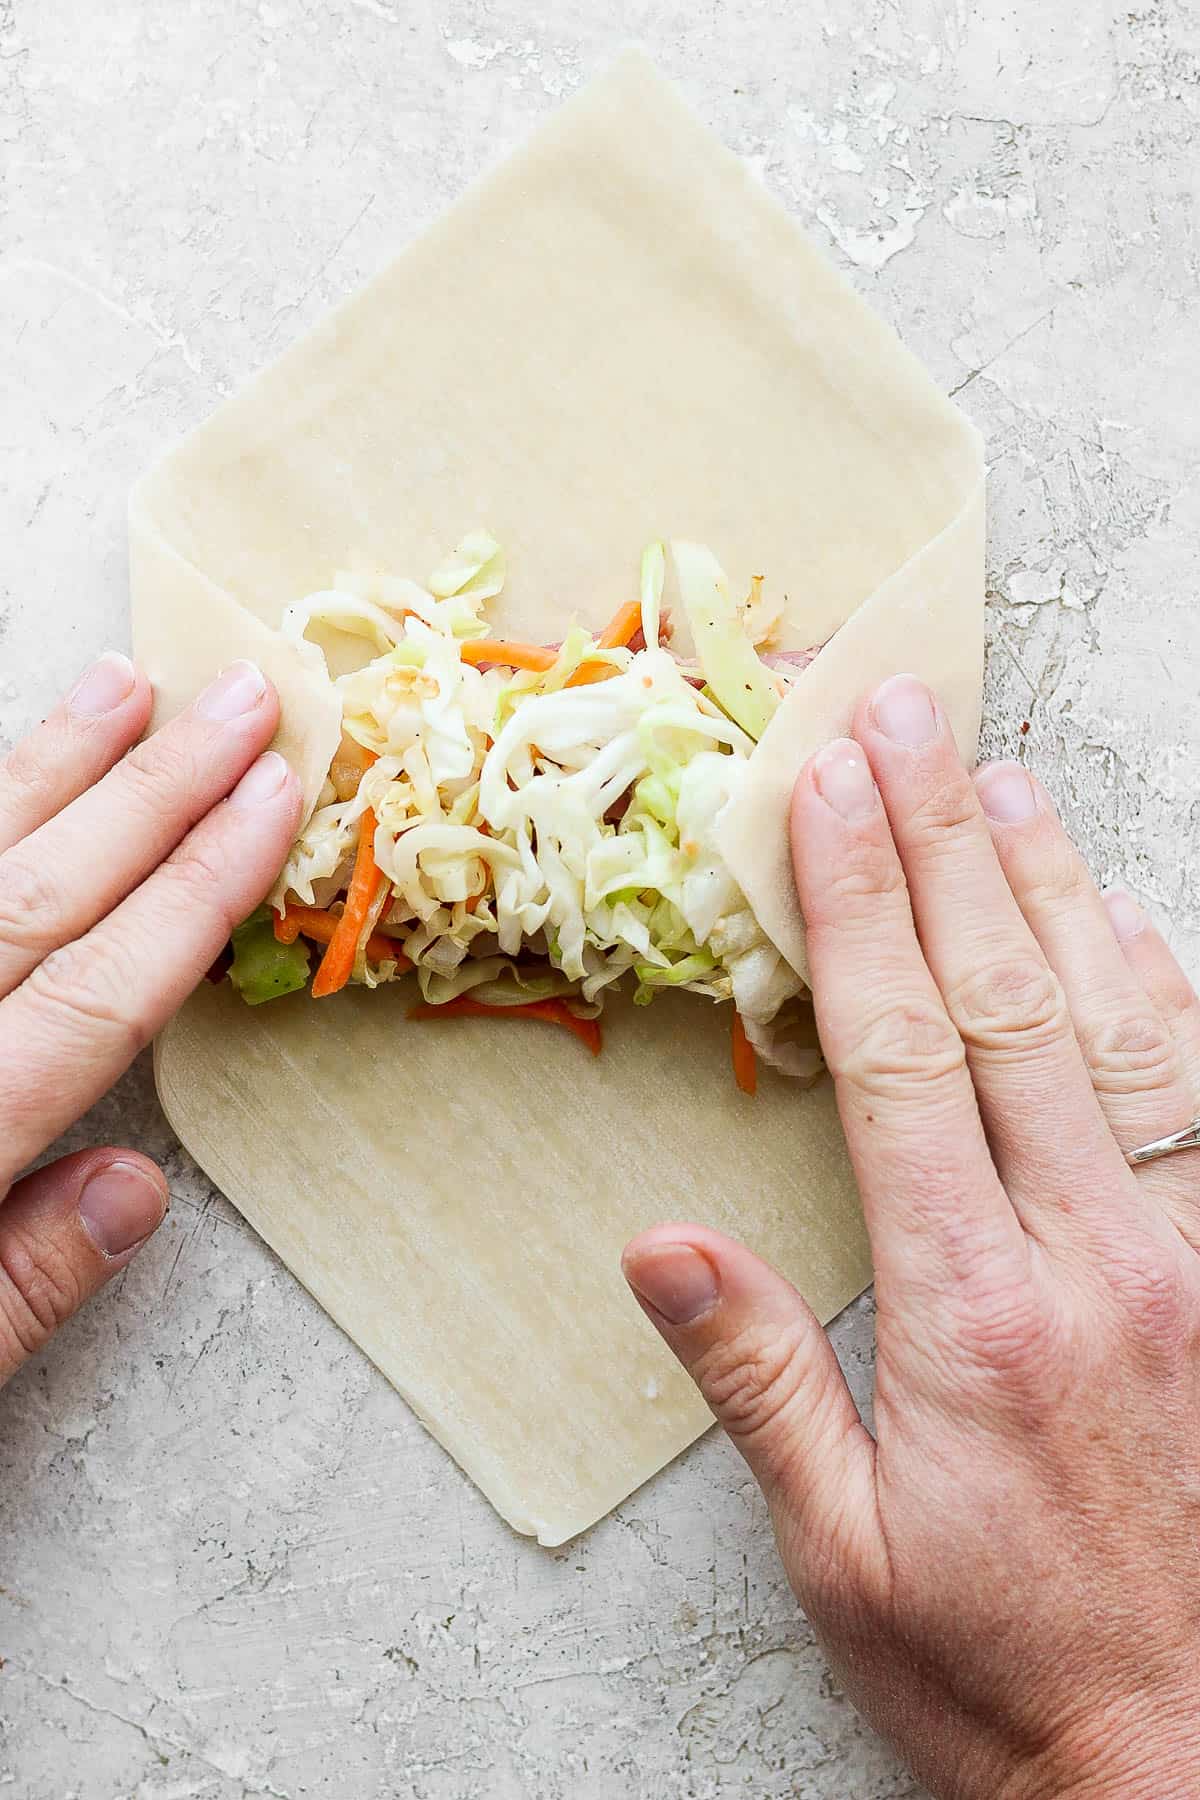 Two hands folding in the sides of the egg roll wrapper.